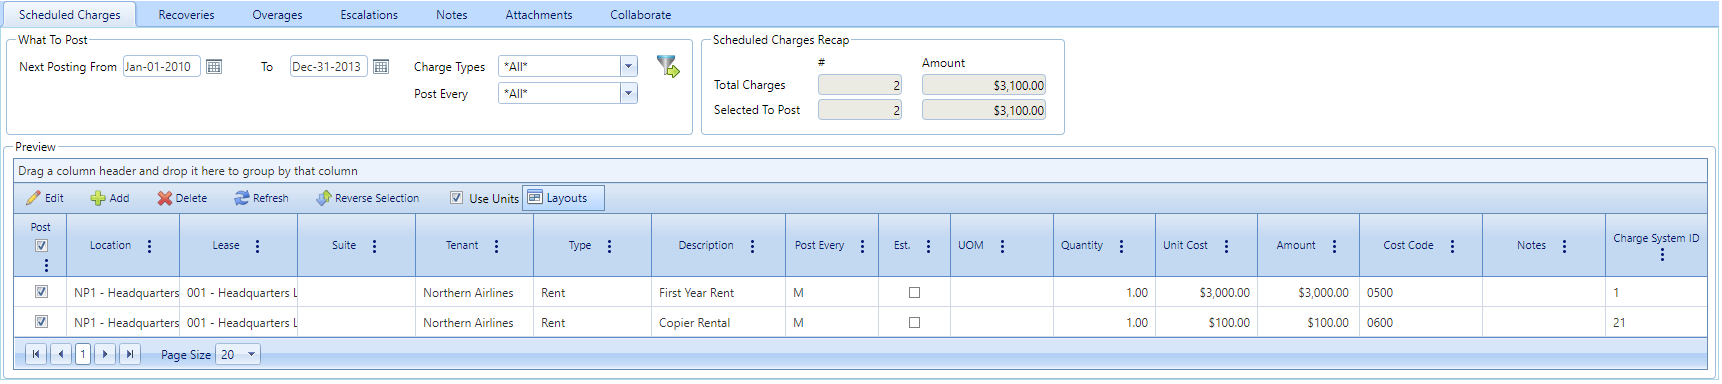 3. Lease Administrator Scheduled Charges Tab